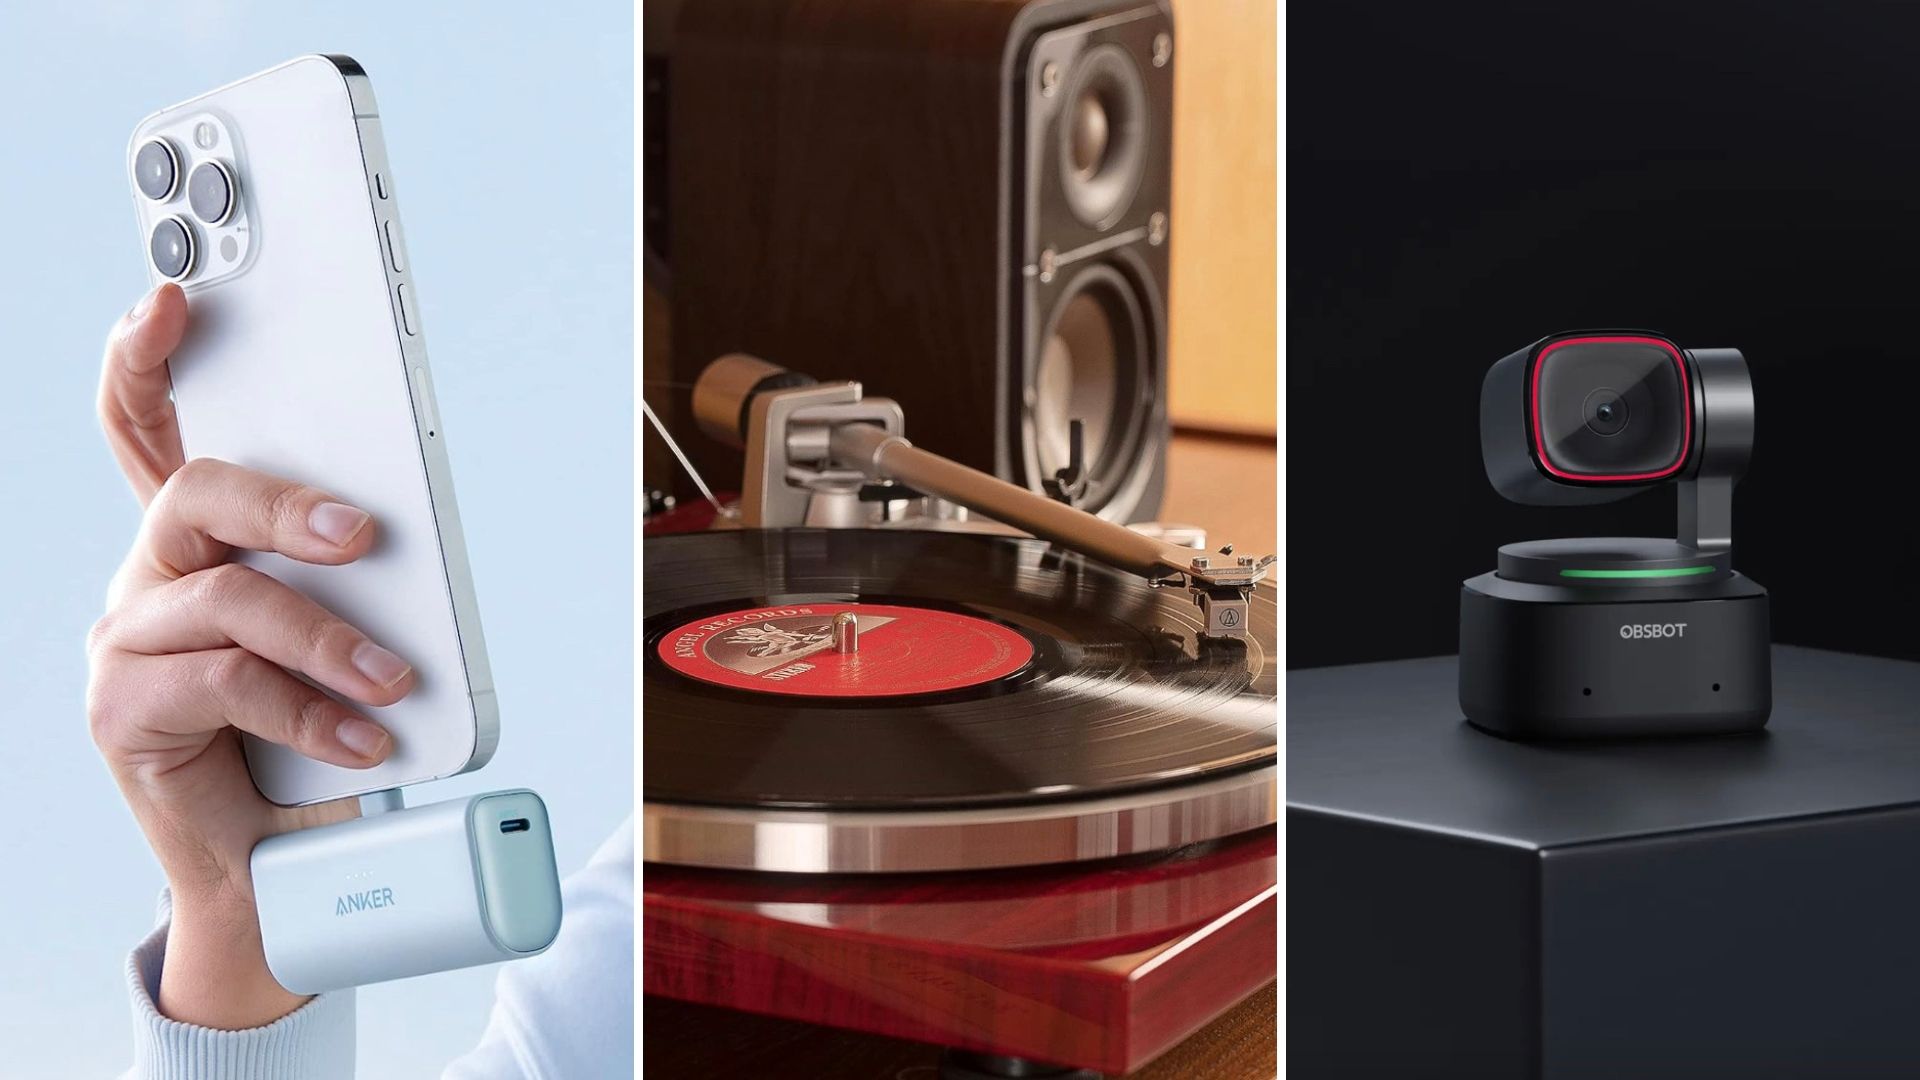 HTG Deals featuring Anker, vinyl player, and OBSBOT